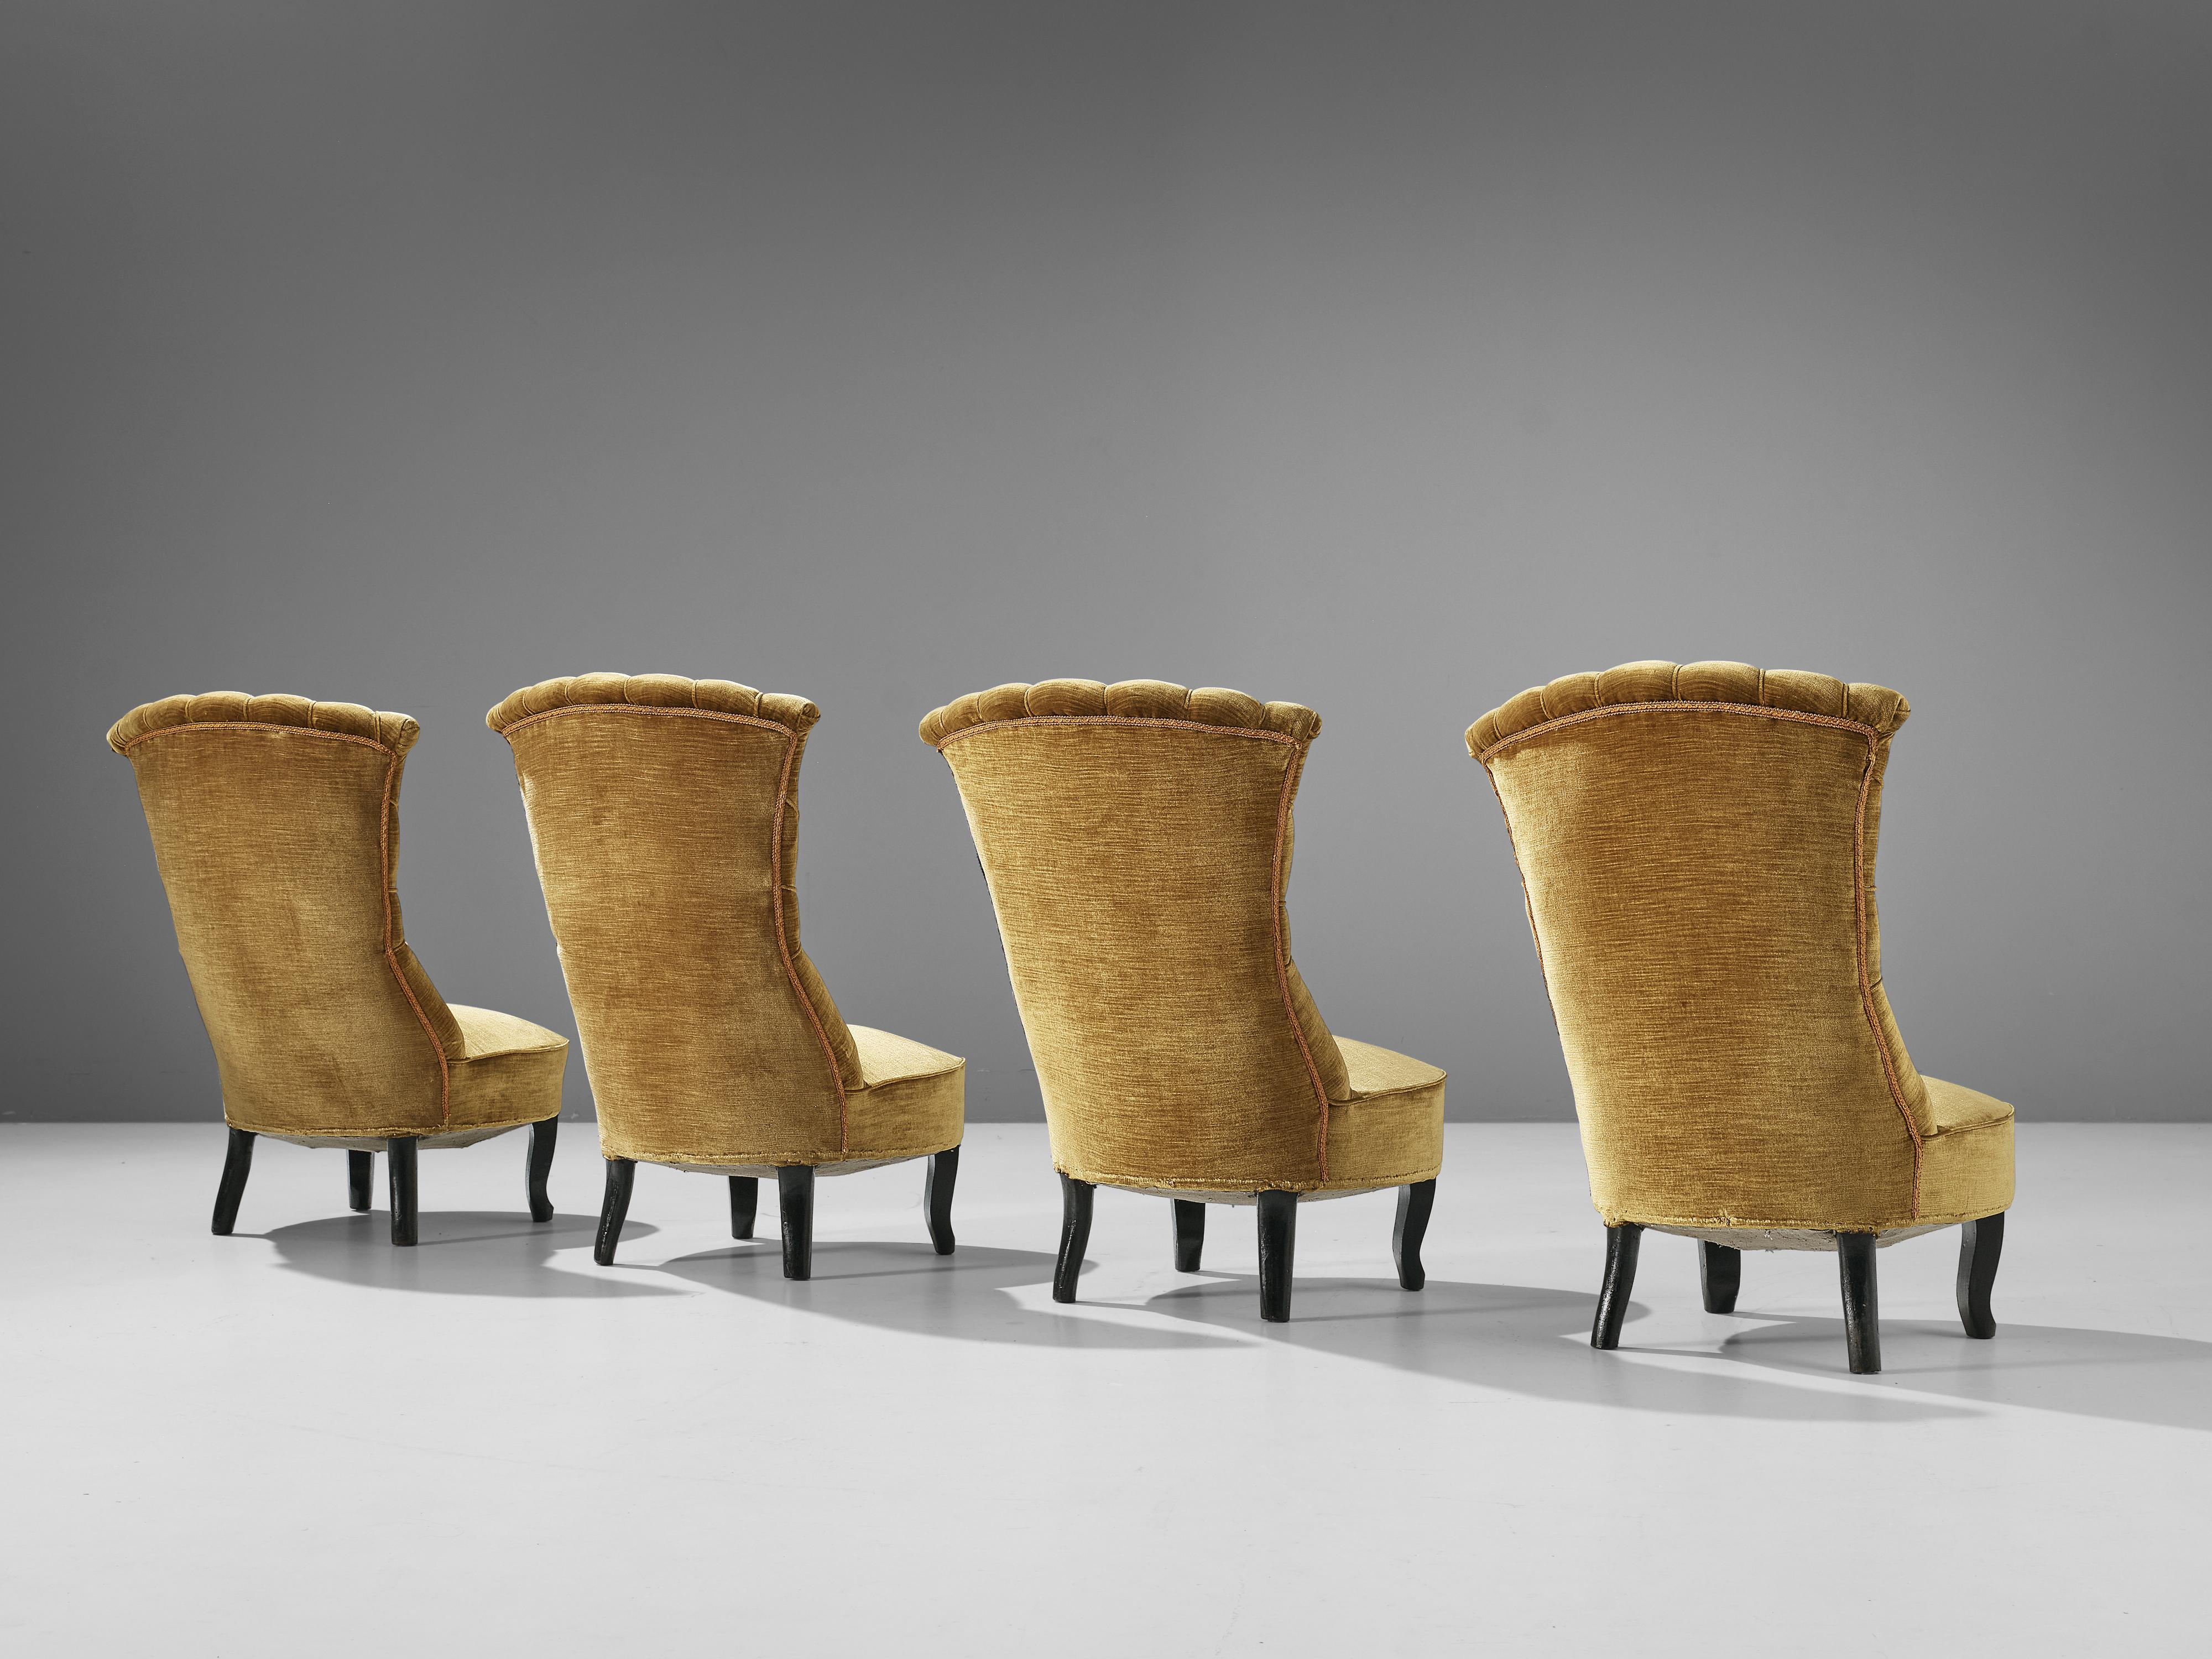 Side chairs, velours, wood, France, 1930s

Elegant set of Art Deco chairs. The seating of the chairs is upholstered in a classy mustard velours, adding to the aesthetic of the chair. The backrest has a beautiful decoration that is reminiscent of